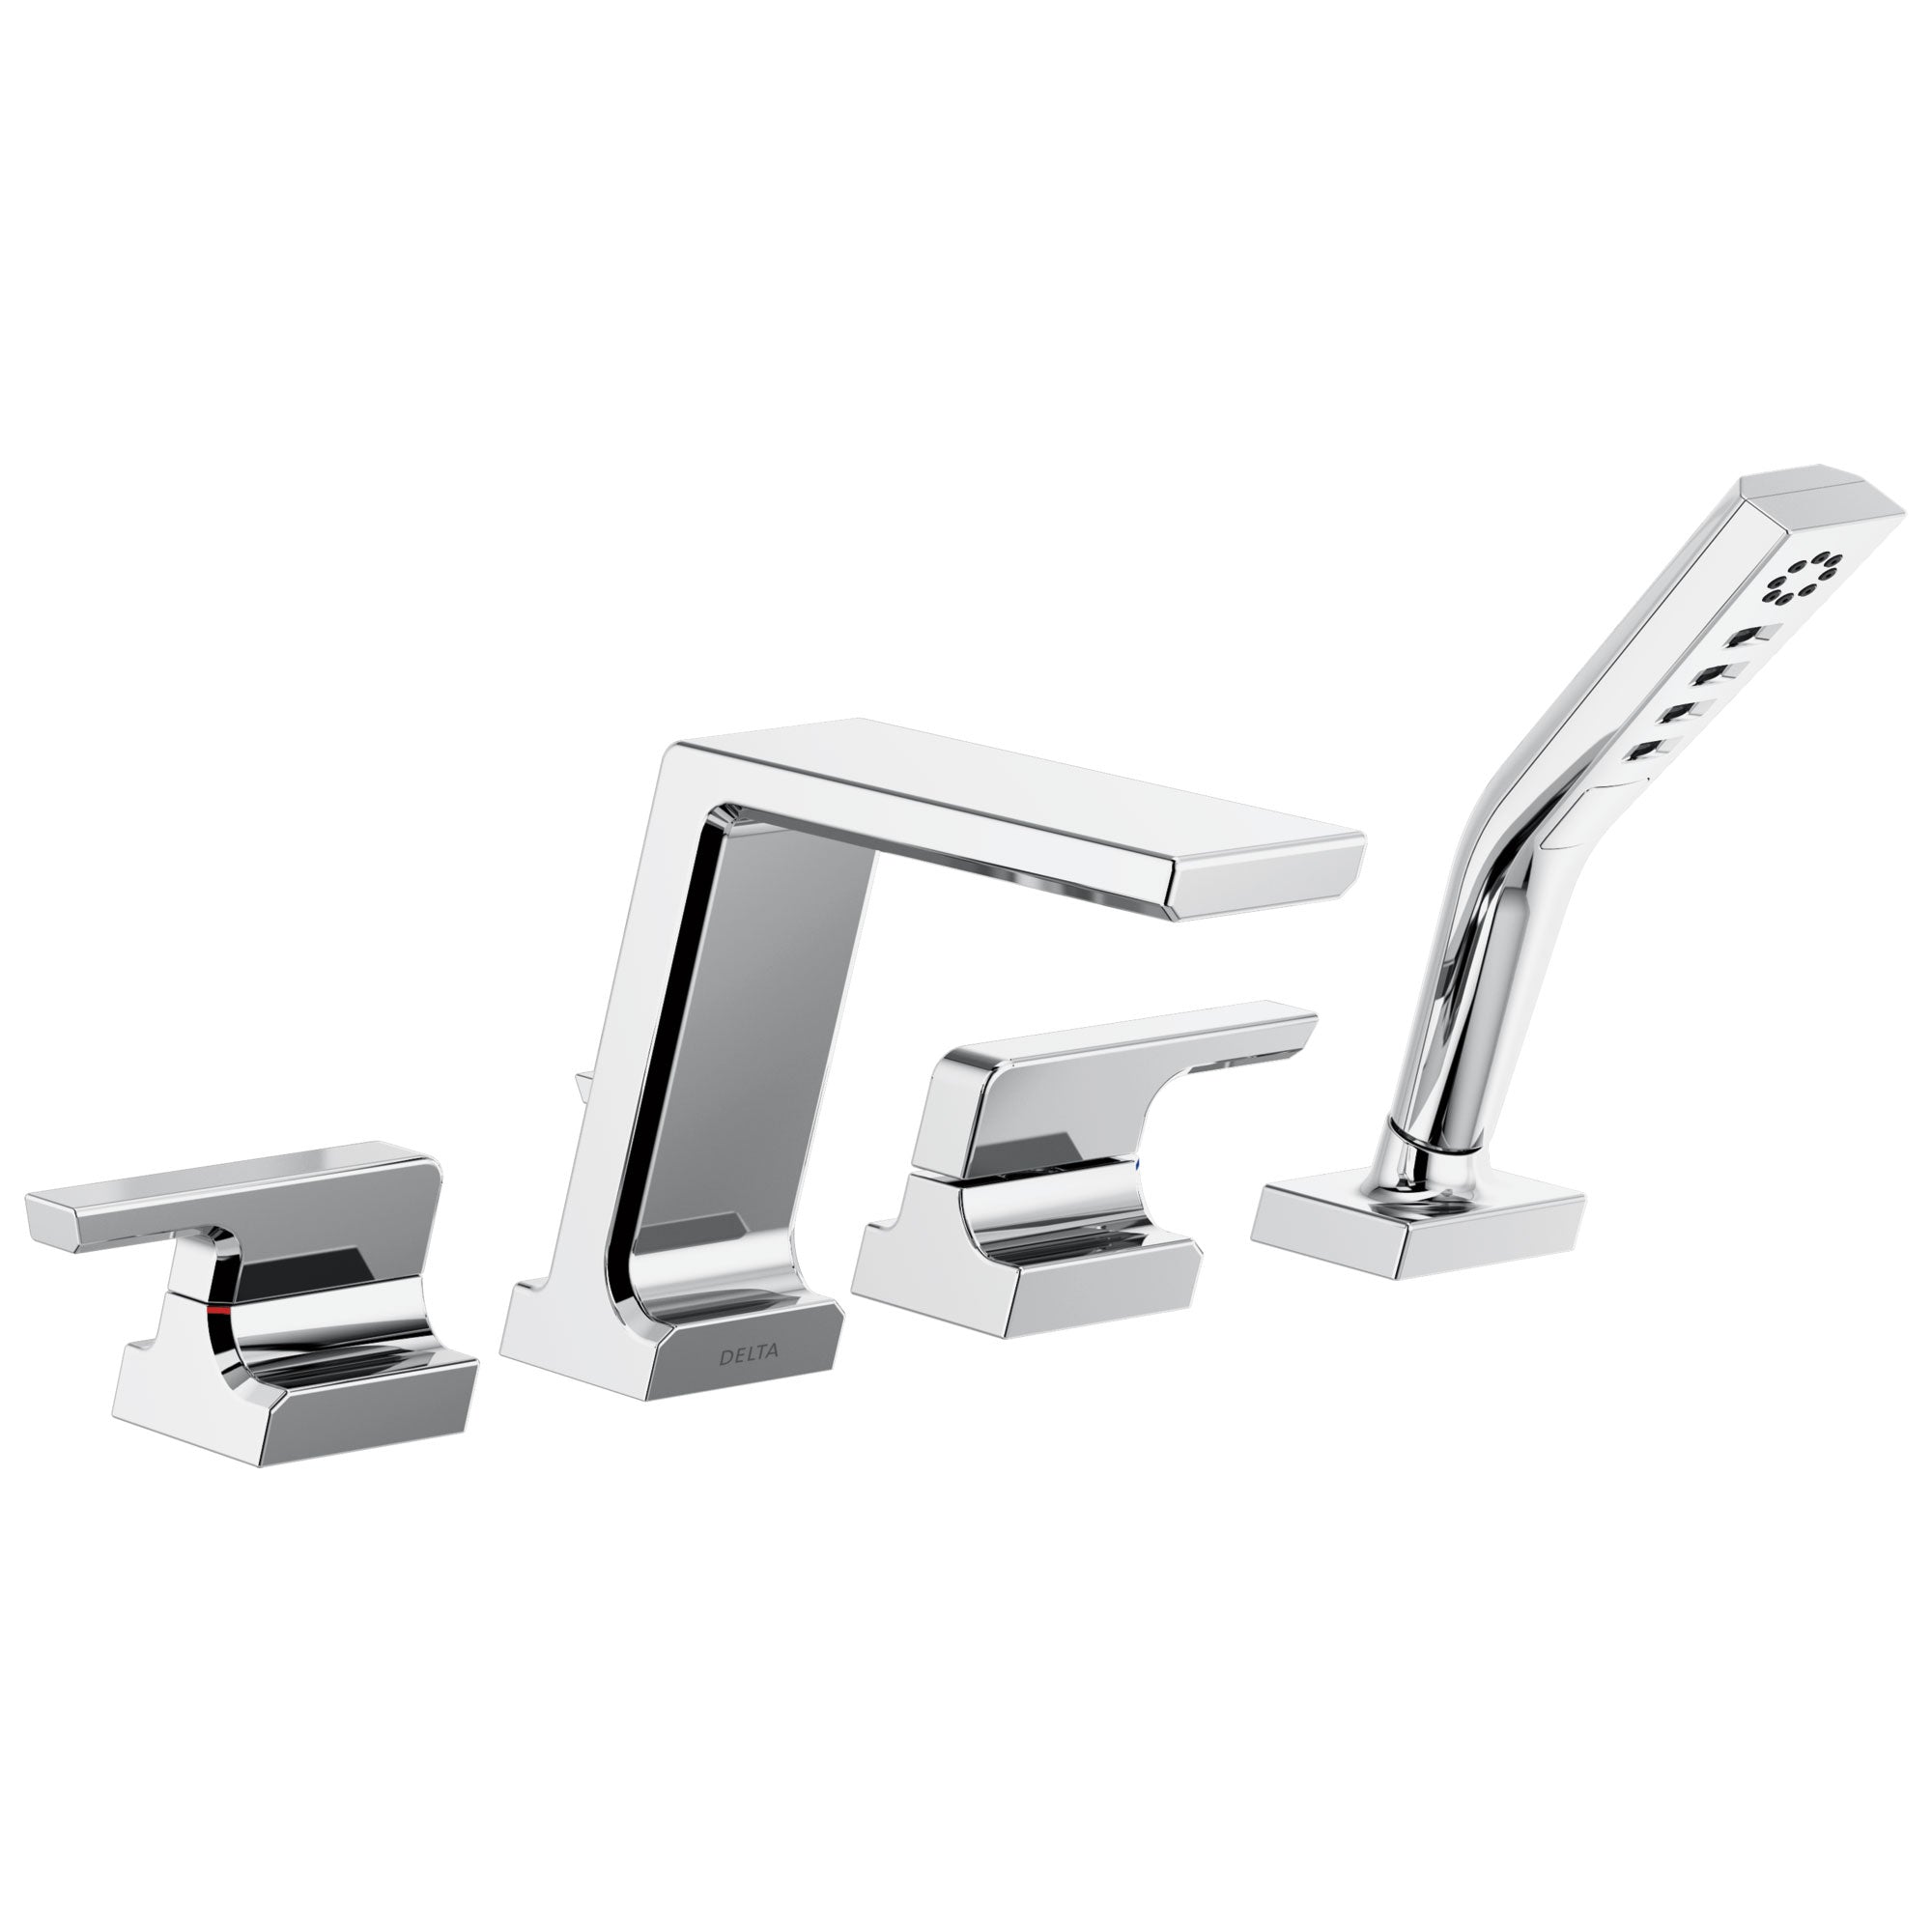 Delta Pivotal Modern Chrome Finish Roman Tub Filler Faucet with Hand Shower Includes Rough-in Valve and 2 Lever Handles D3032V